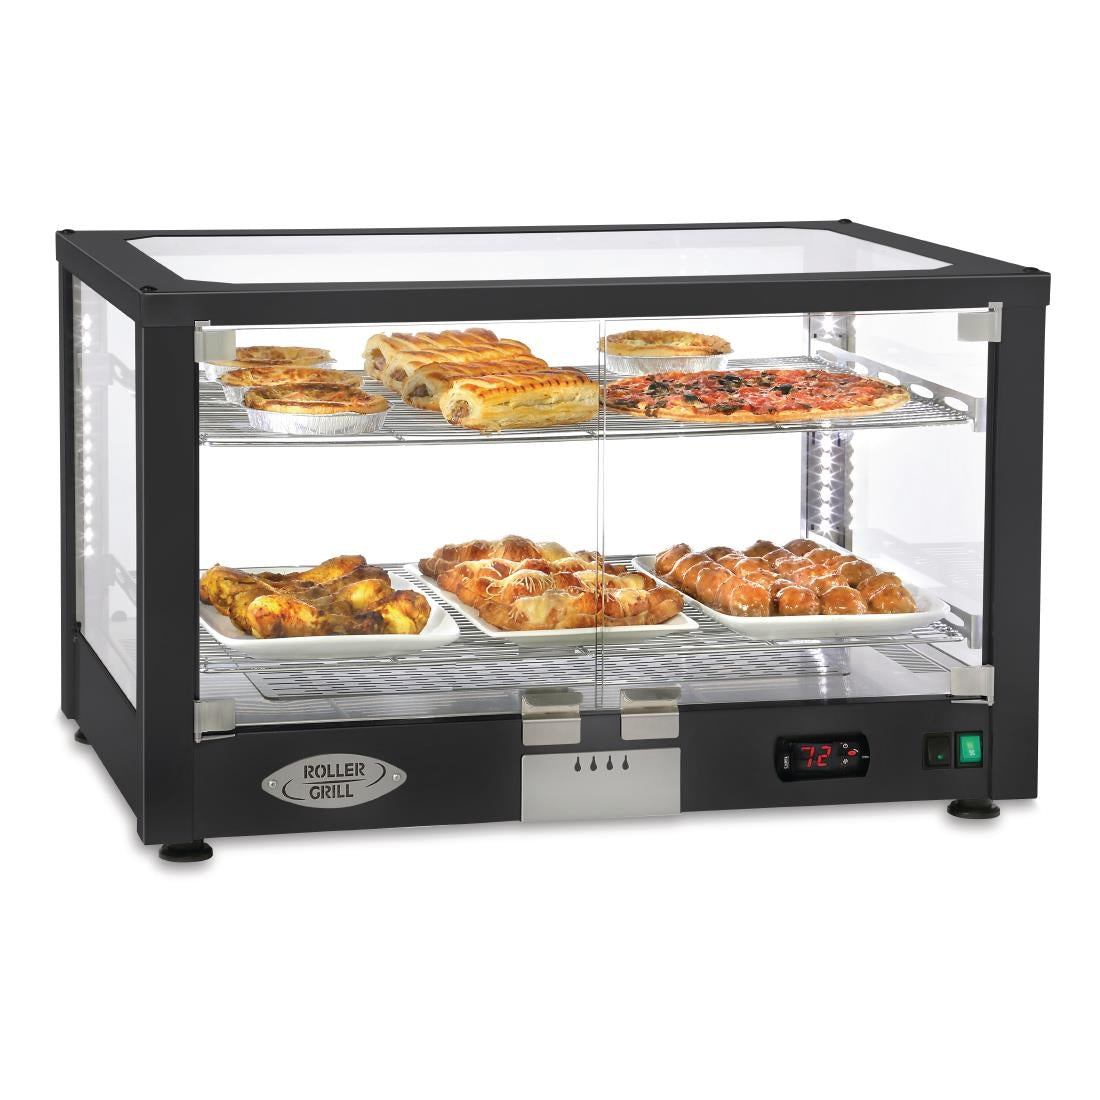 DF411 Roller Grill Heated 2 Shelf Display Cabinet WD780 SN JD Catering Equipment Solutions Ltd